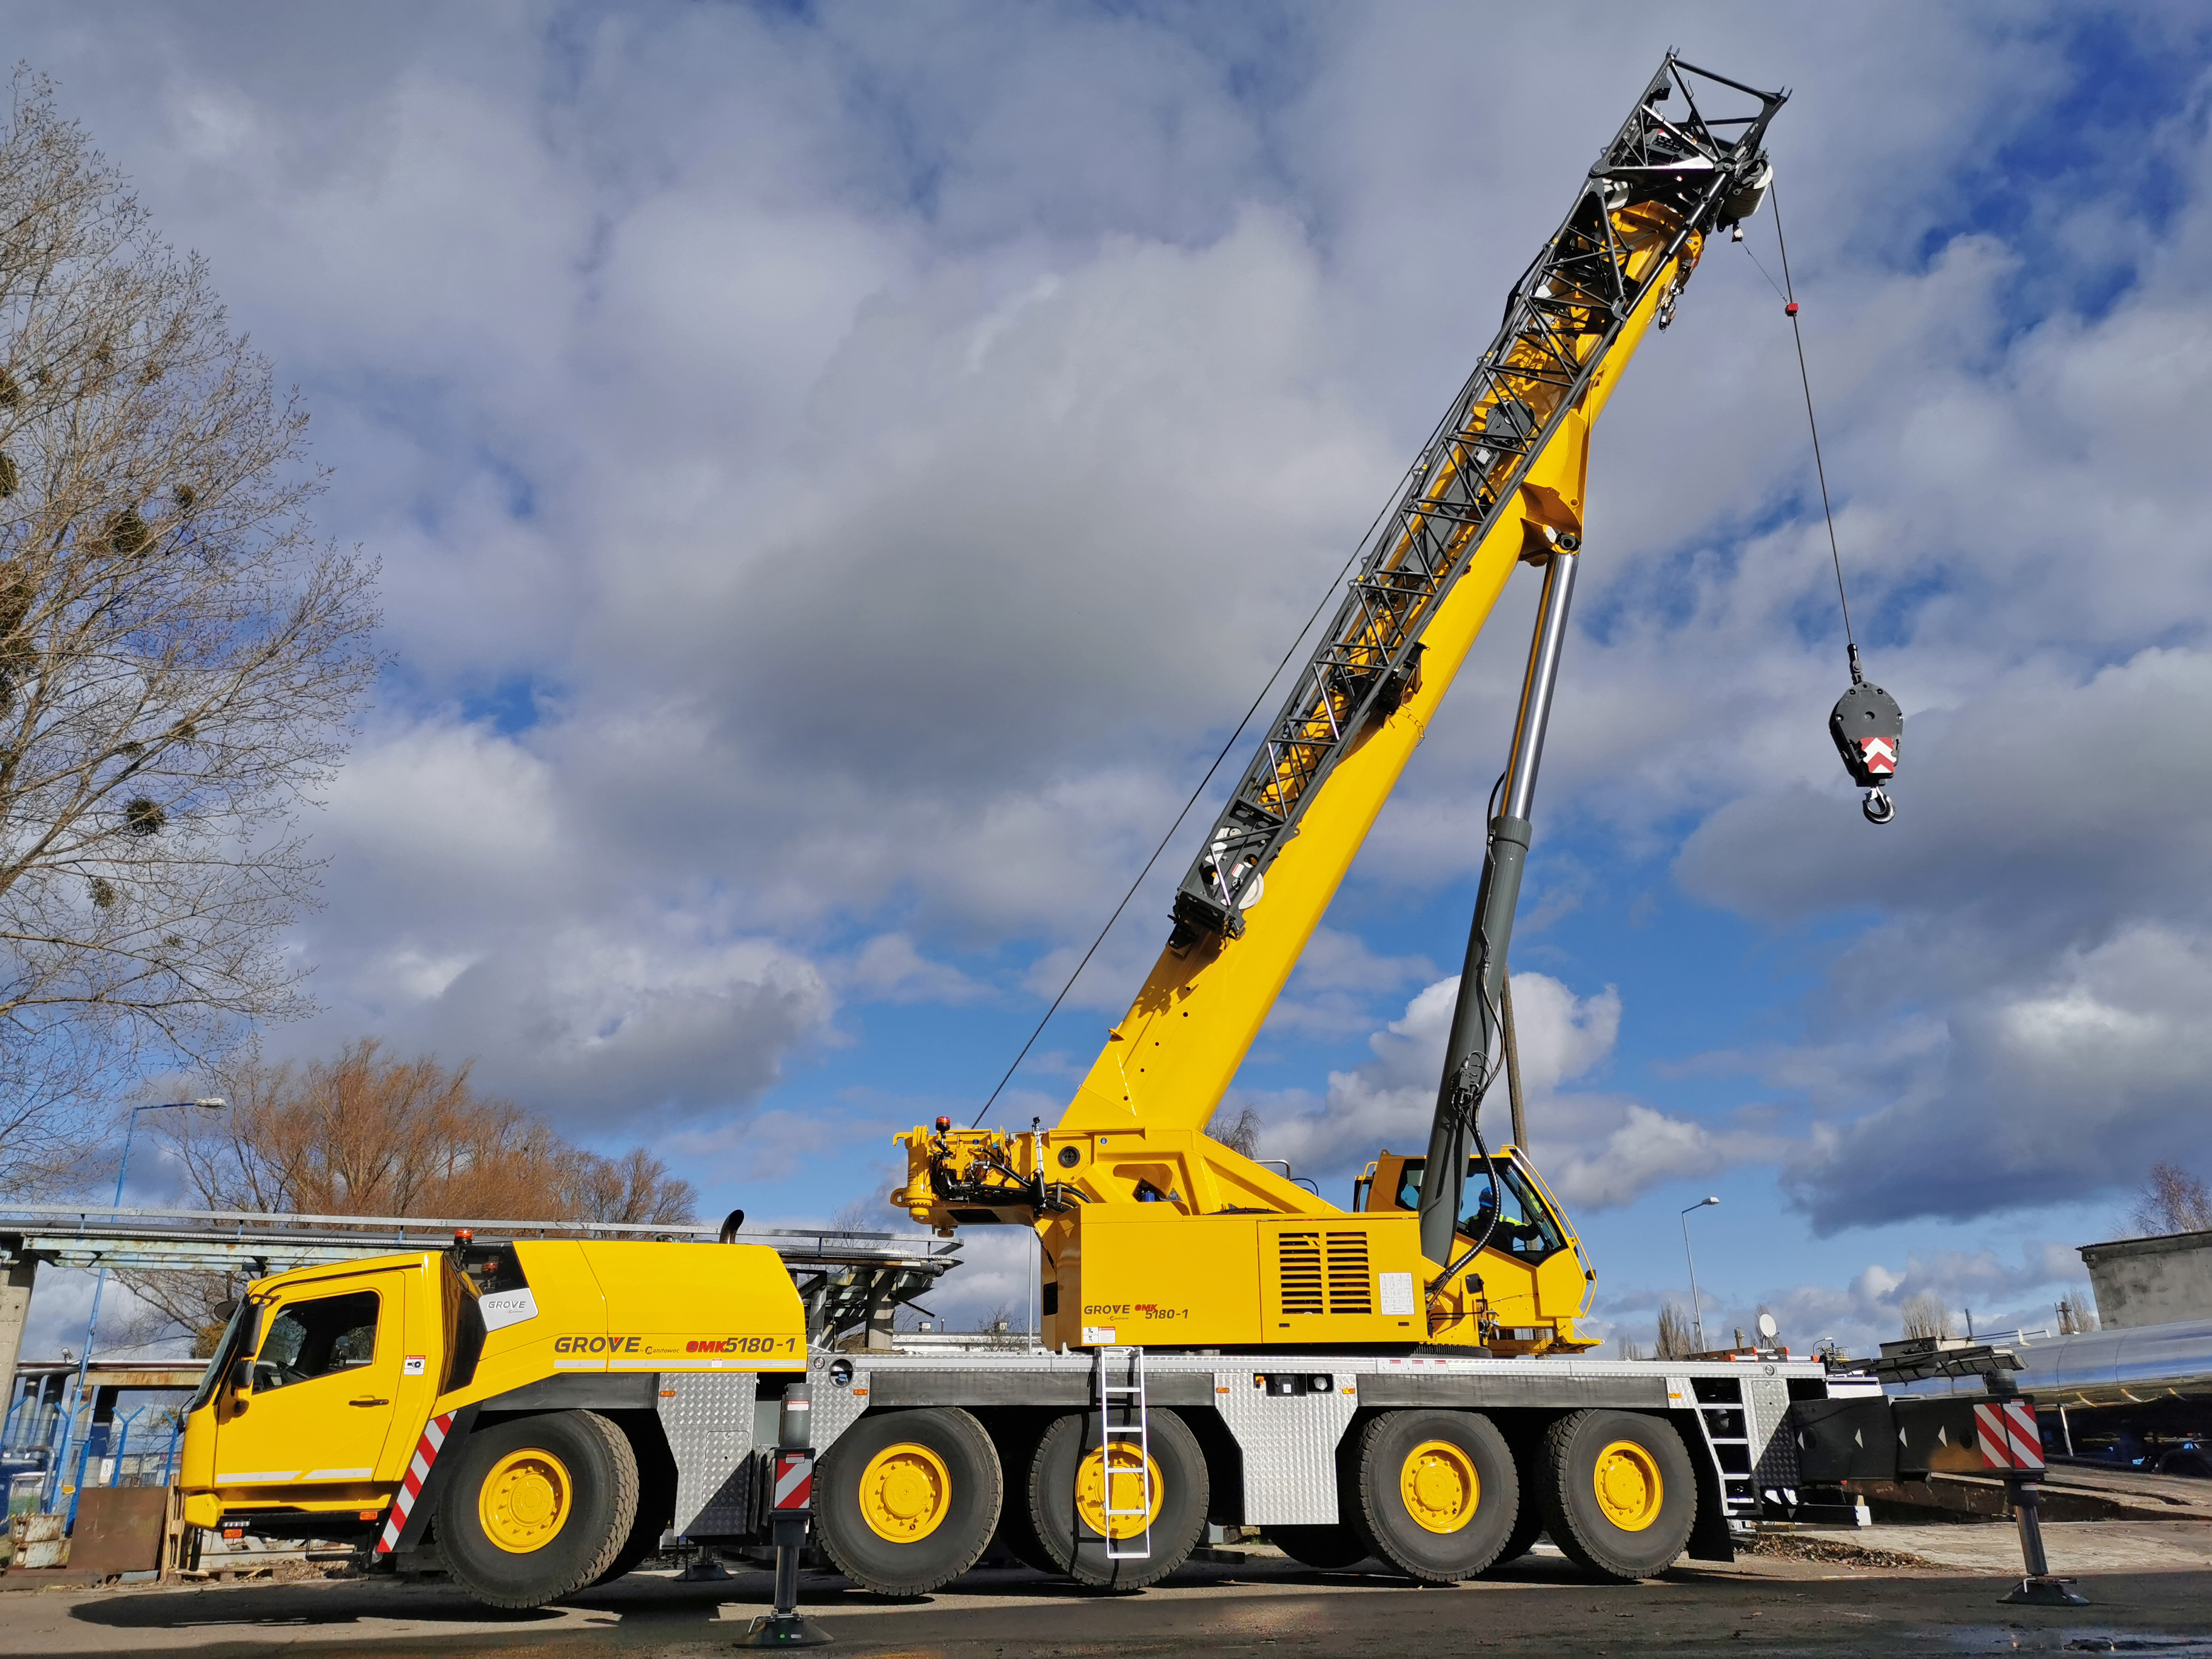 The GMK5180-1 has a nominal load capacity of 180 t, 64 m of boom and a total tip height of 101 m.